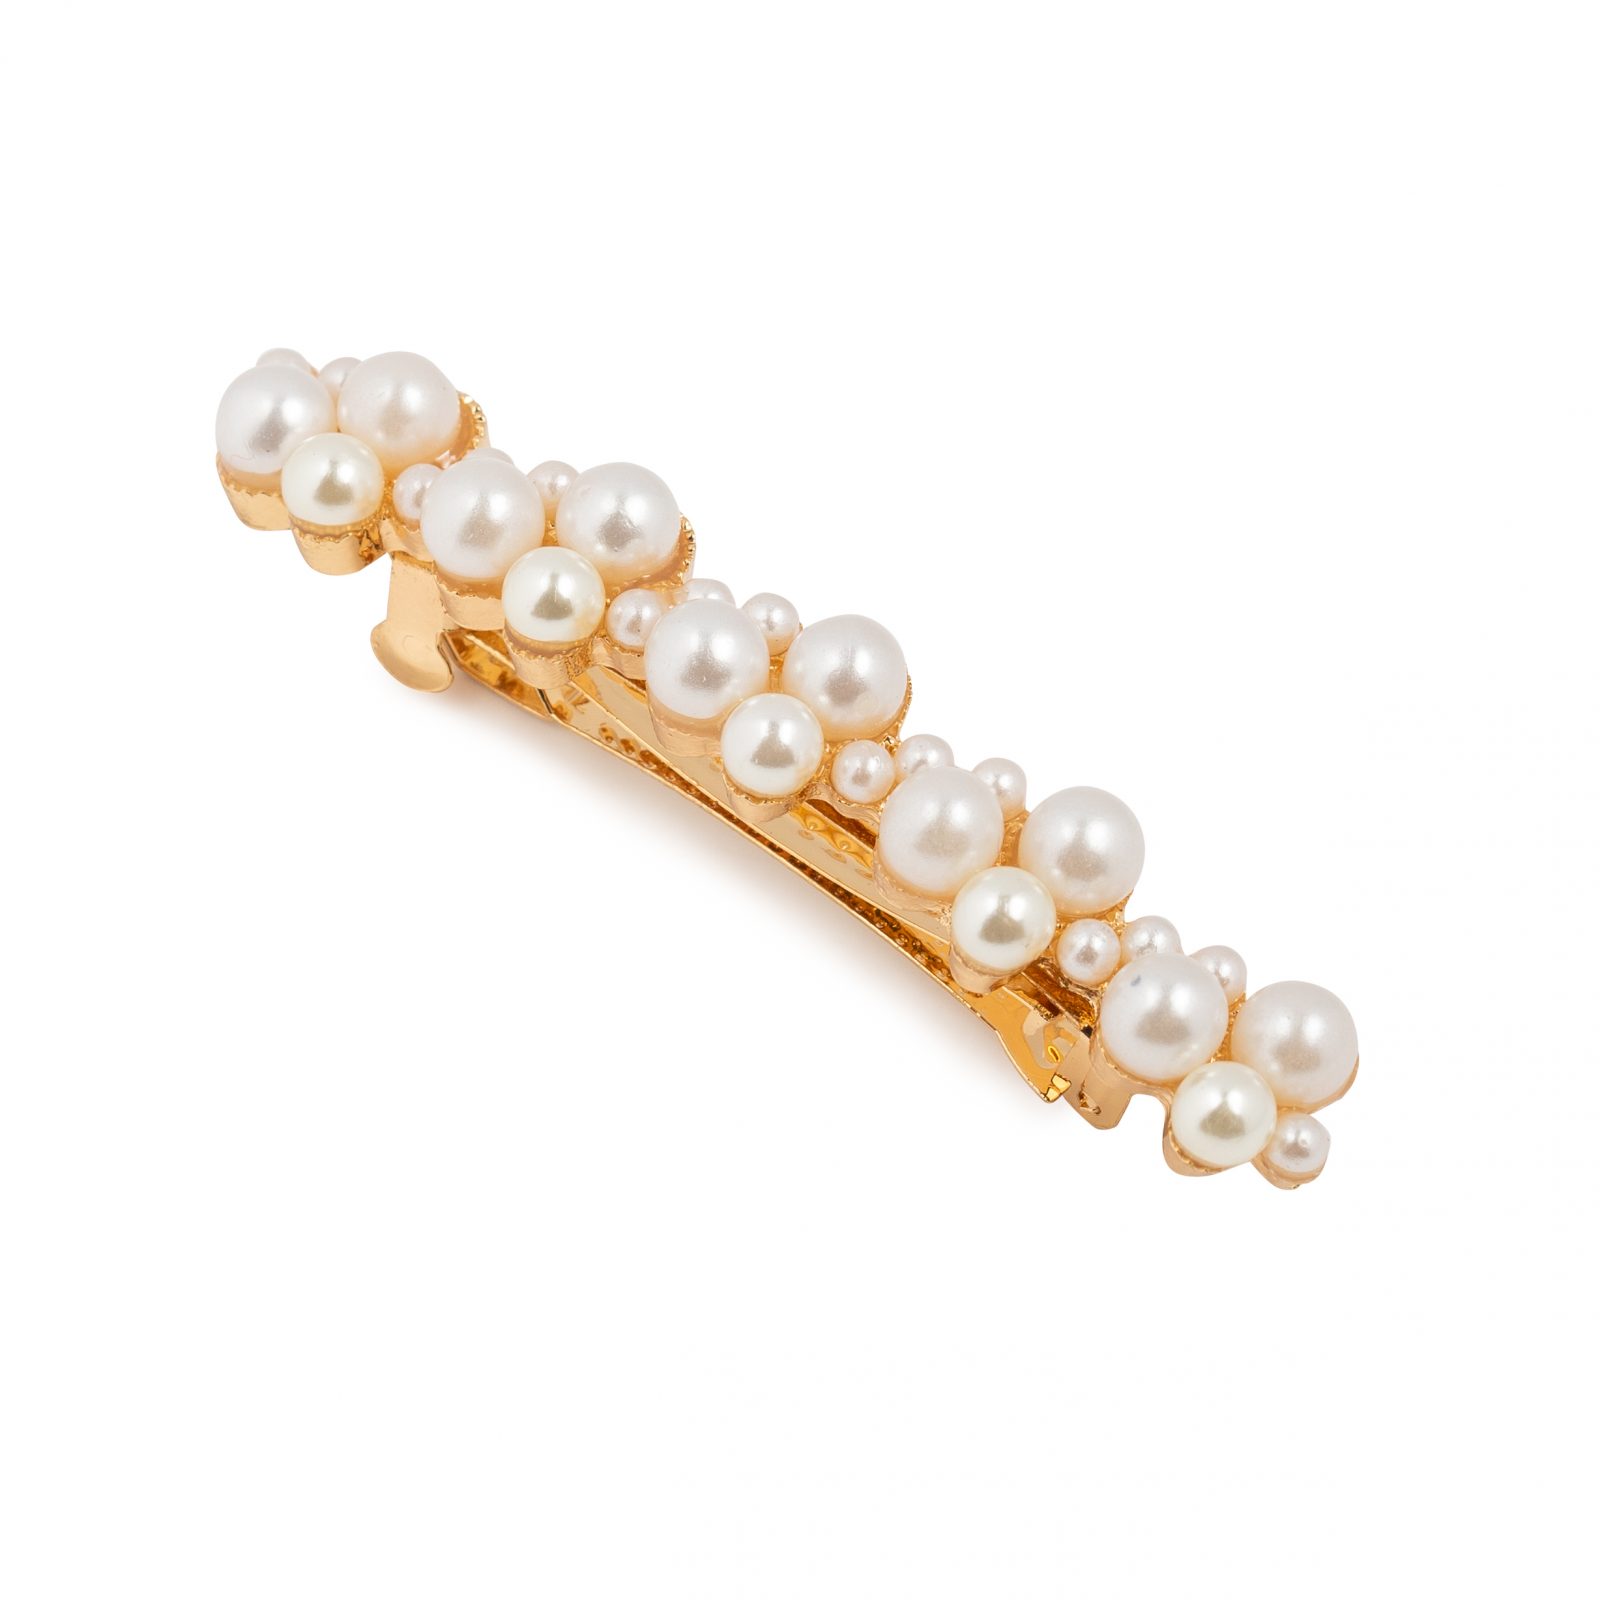 BLOOMING-PEARL-BARRETTE-HAIR-CLIP – CHICZ